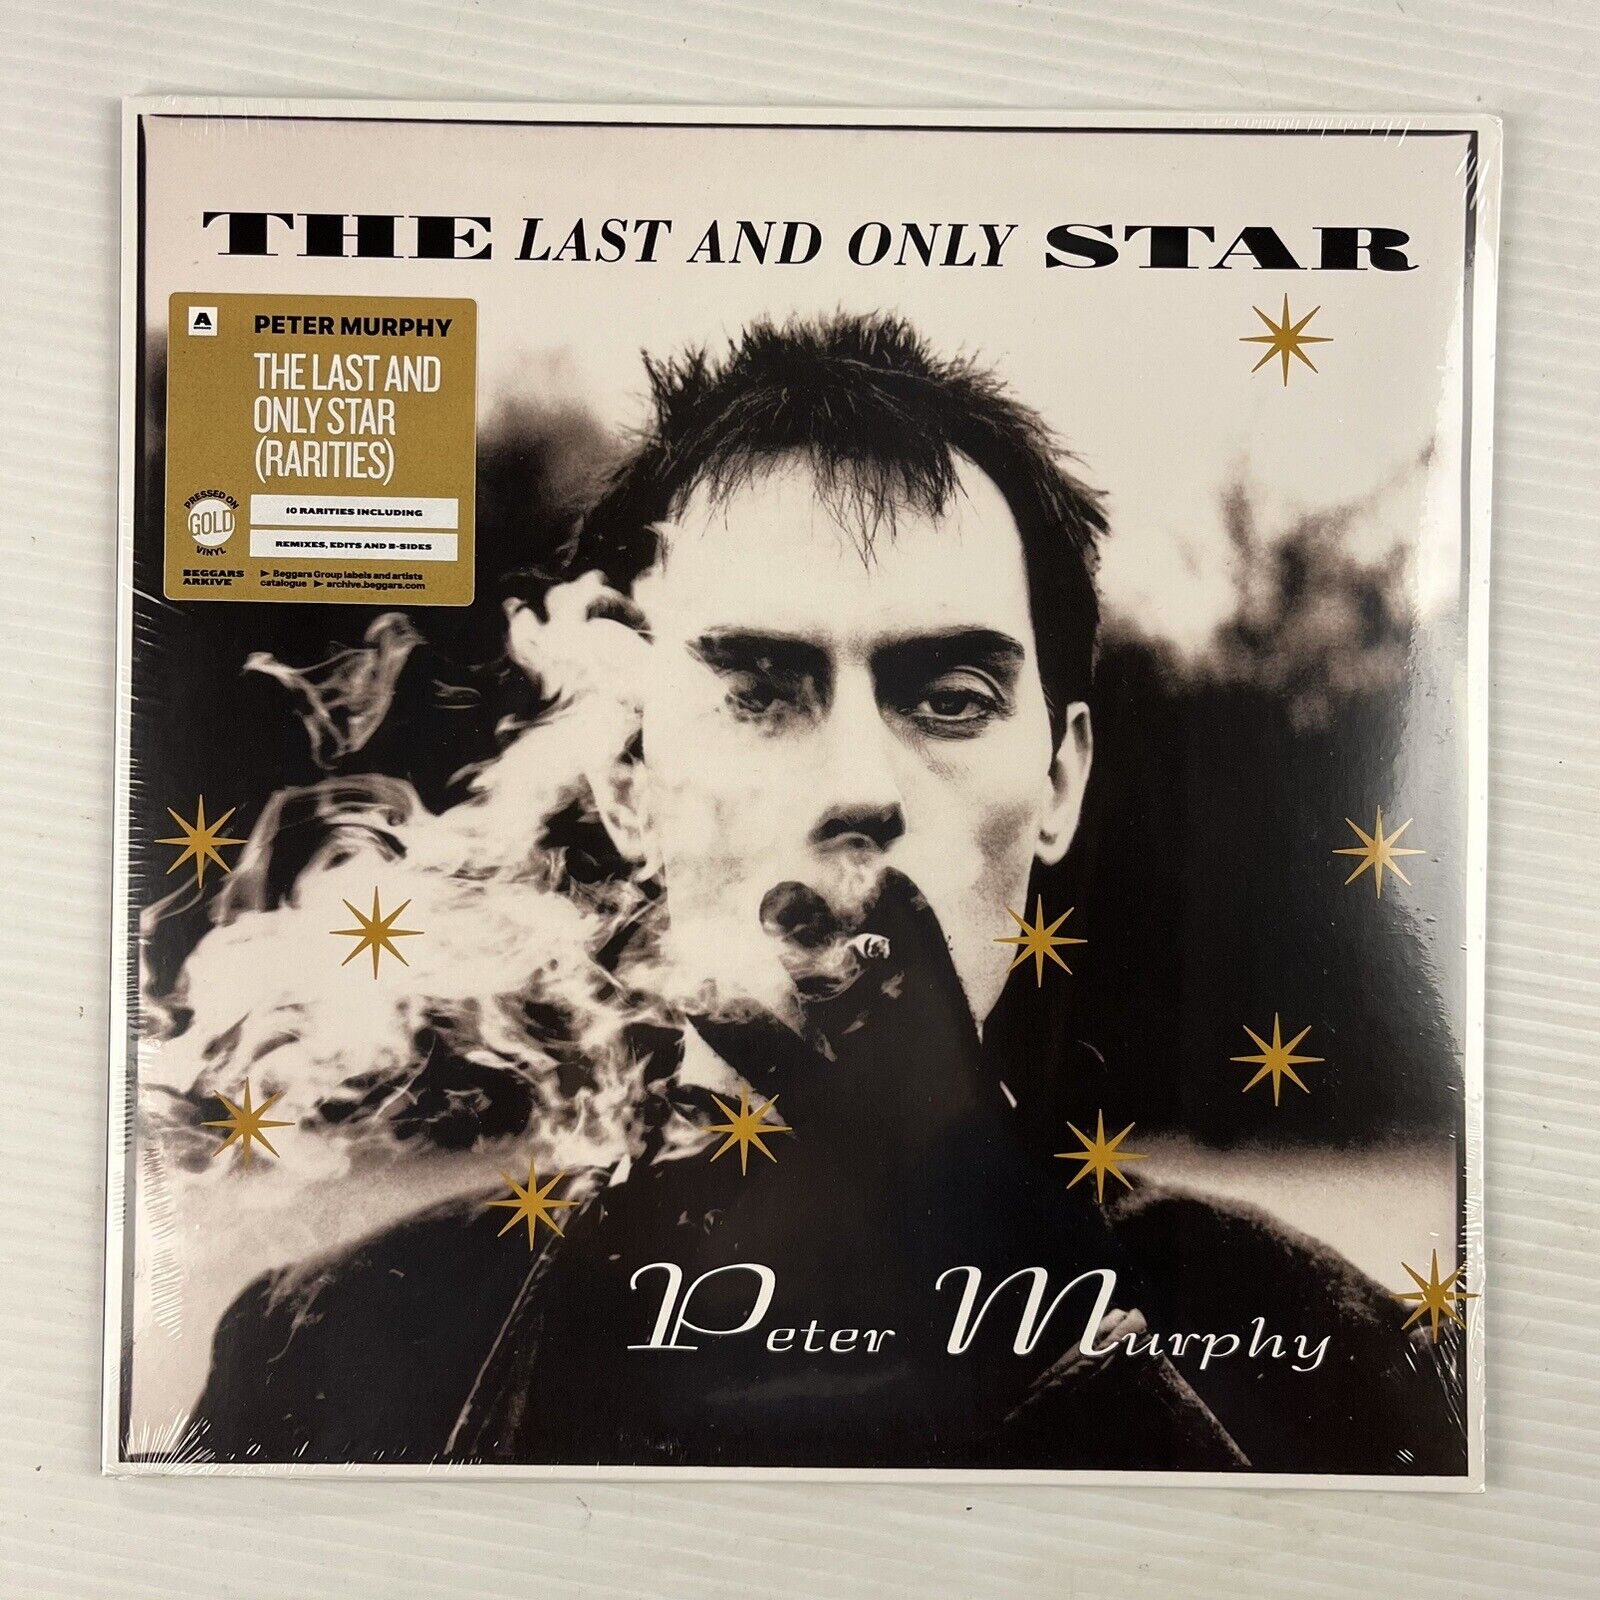 Peter Murphy - Last And Only Star (rarities) LP (Record, 2021) New